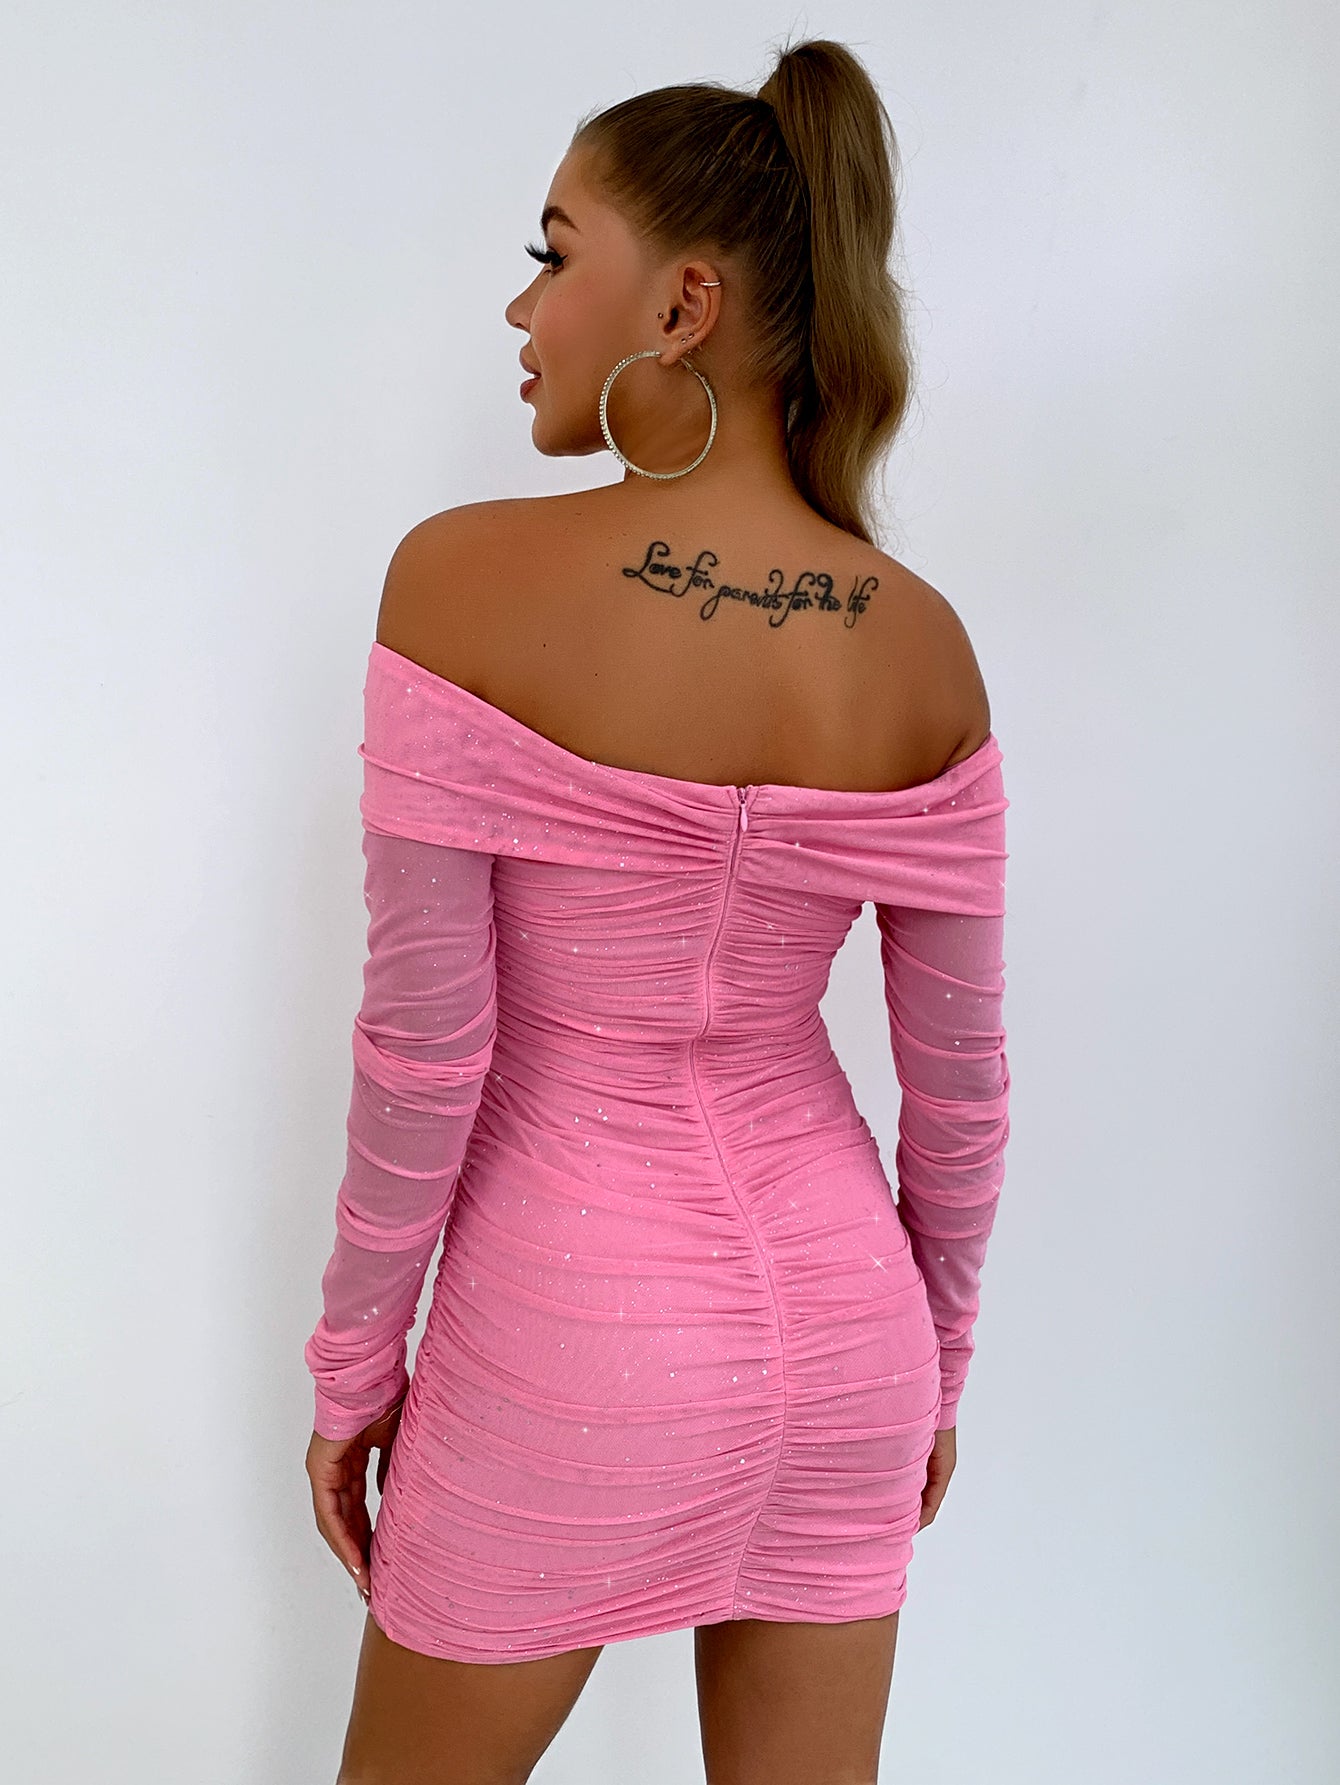 Trendsi Cupid Beauty Supplies Woman Cocktail Dresses Glitter Ruched Off-Shoulder Long Sleeve Bodycon Dress